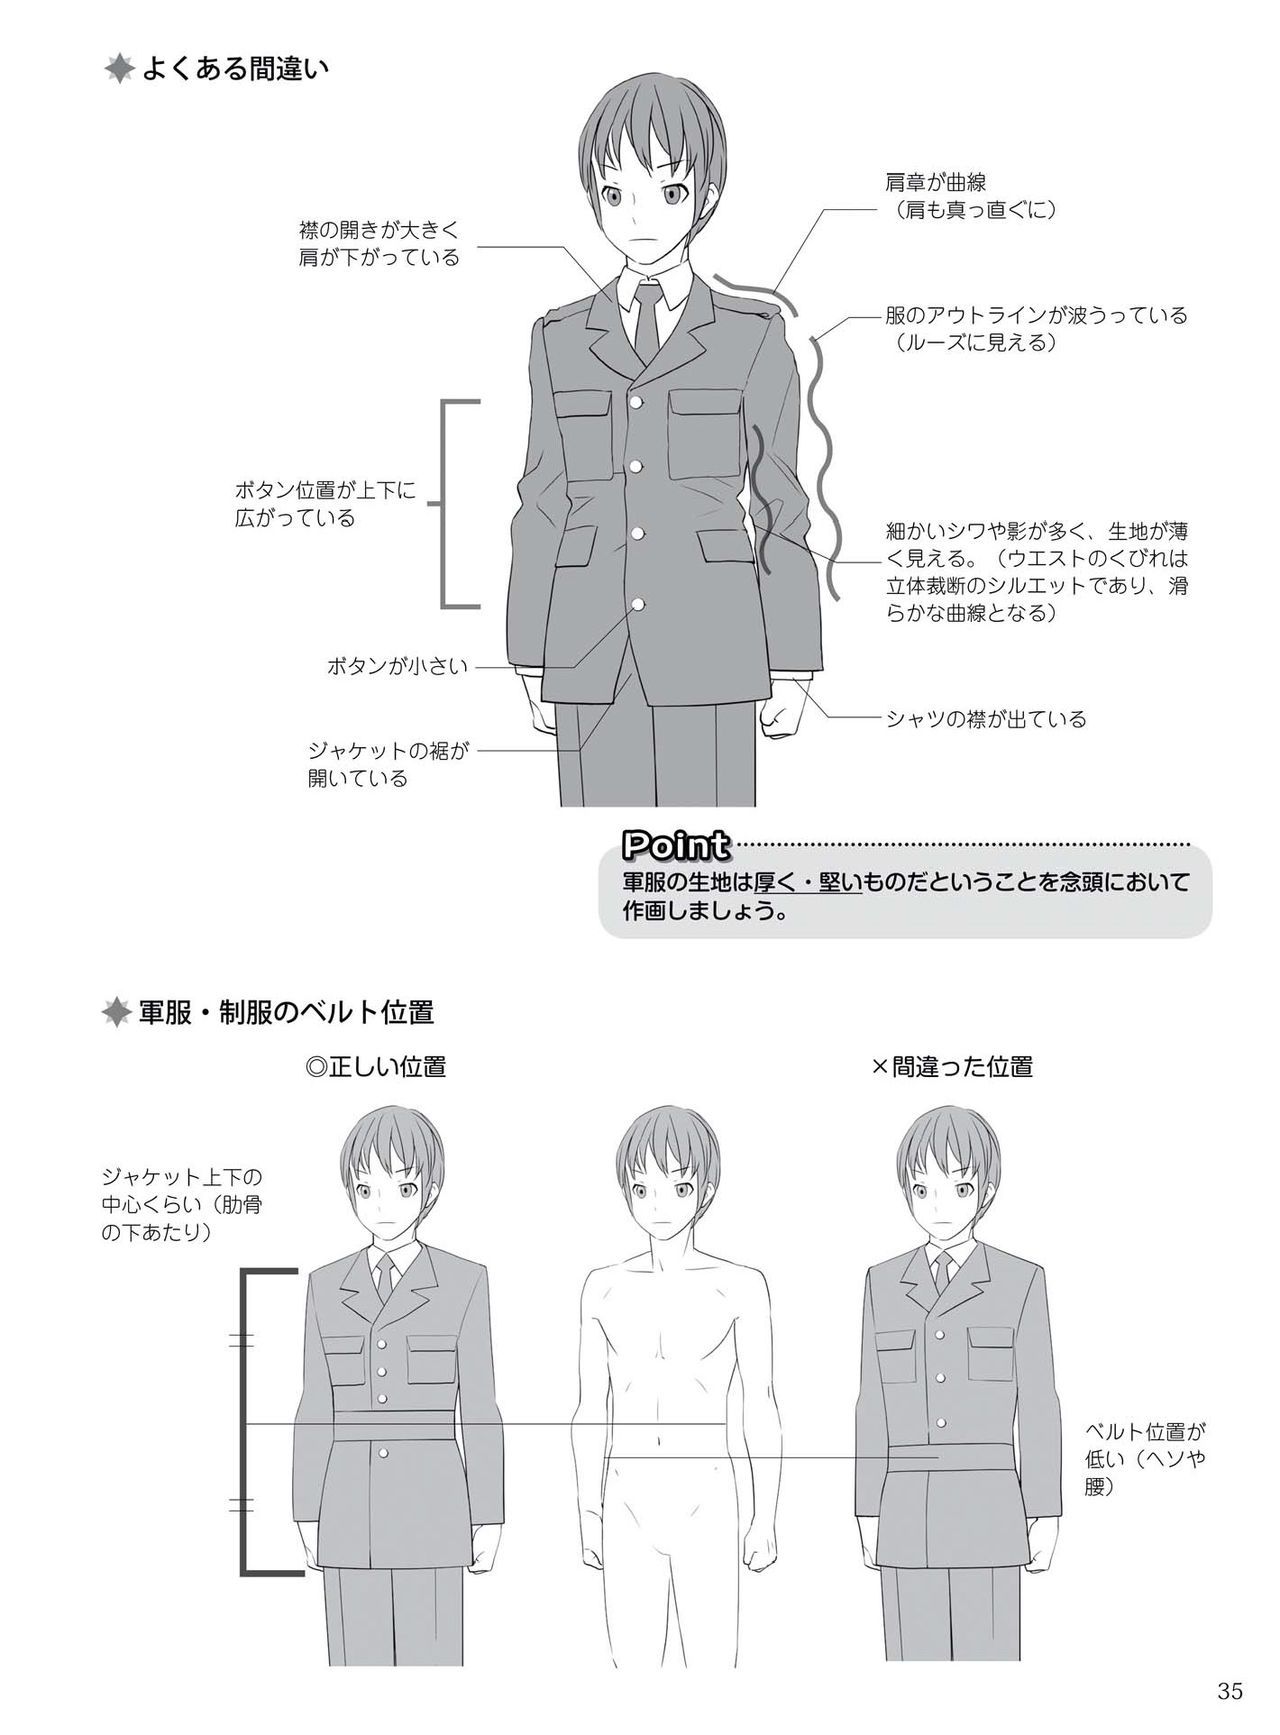 How to draw military uniforms and uniforms From Self-Defense Forces 軍服・制服の描き方 アメリカ軍・自衛隊の制服から戦闘服まで 38